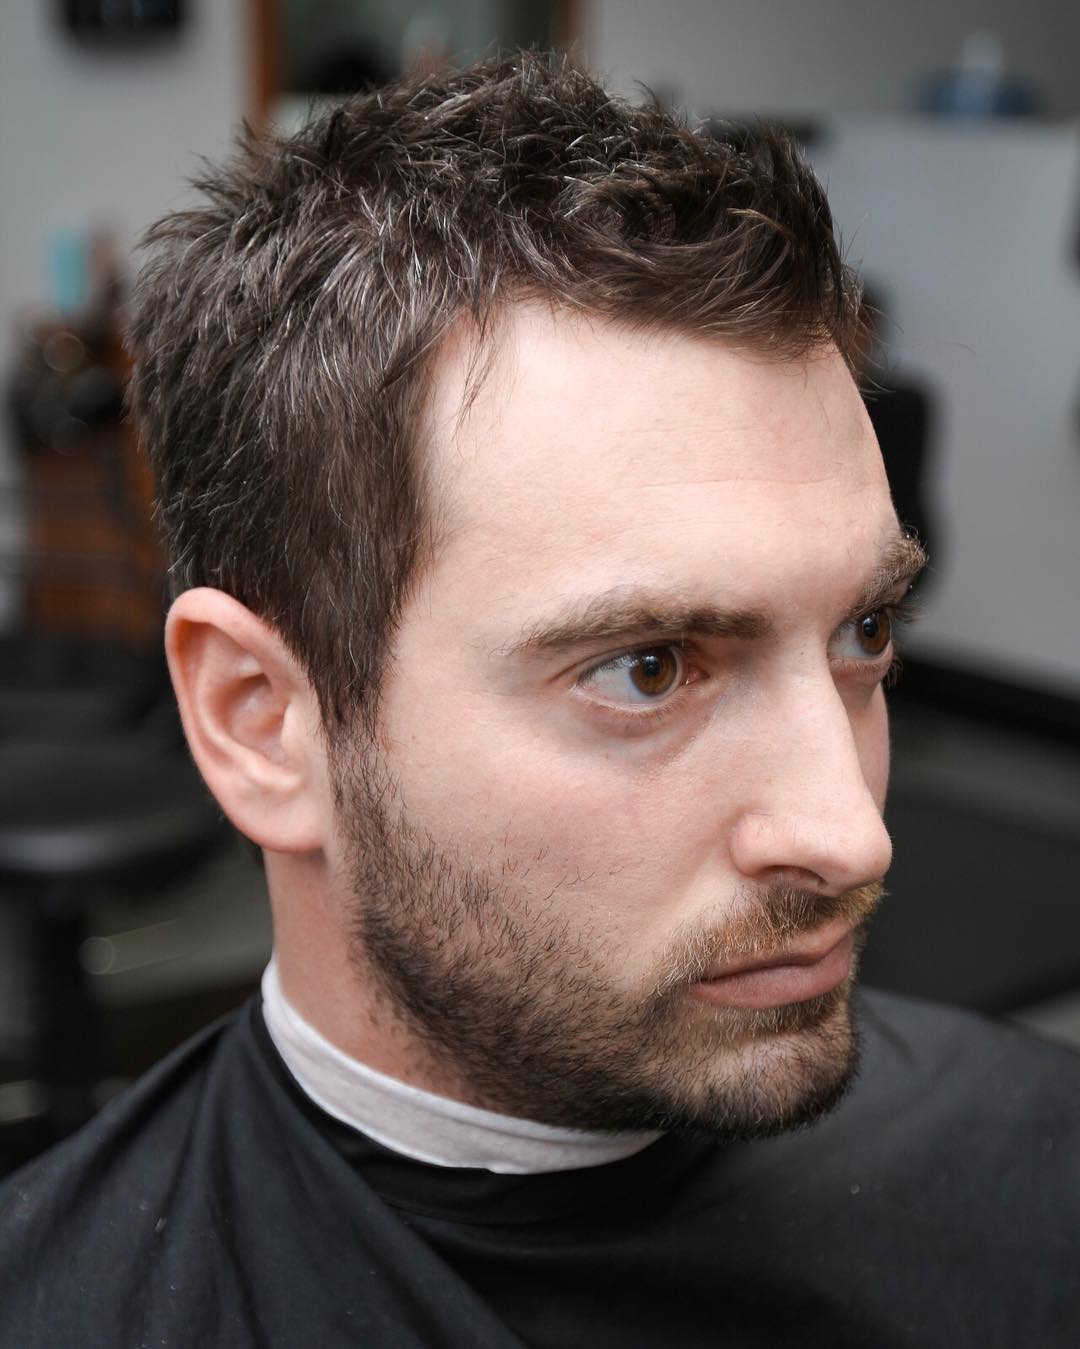 Top 5 Short Haircuts For Men | Your Average Guy